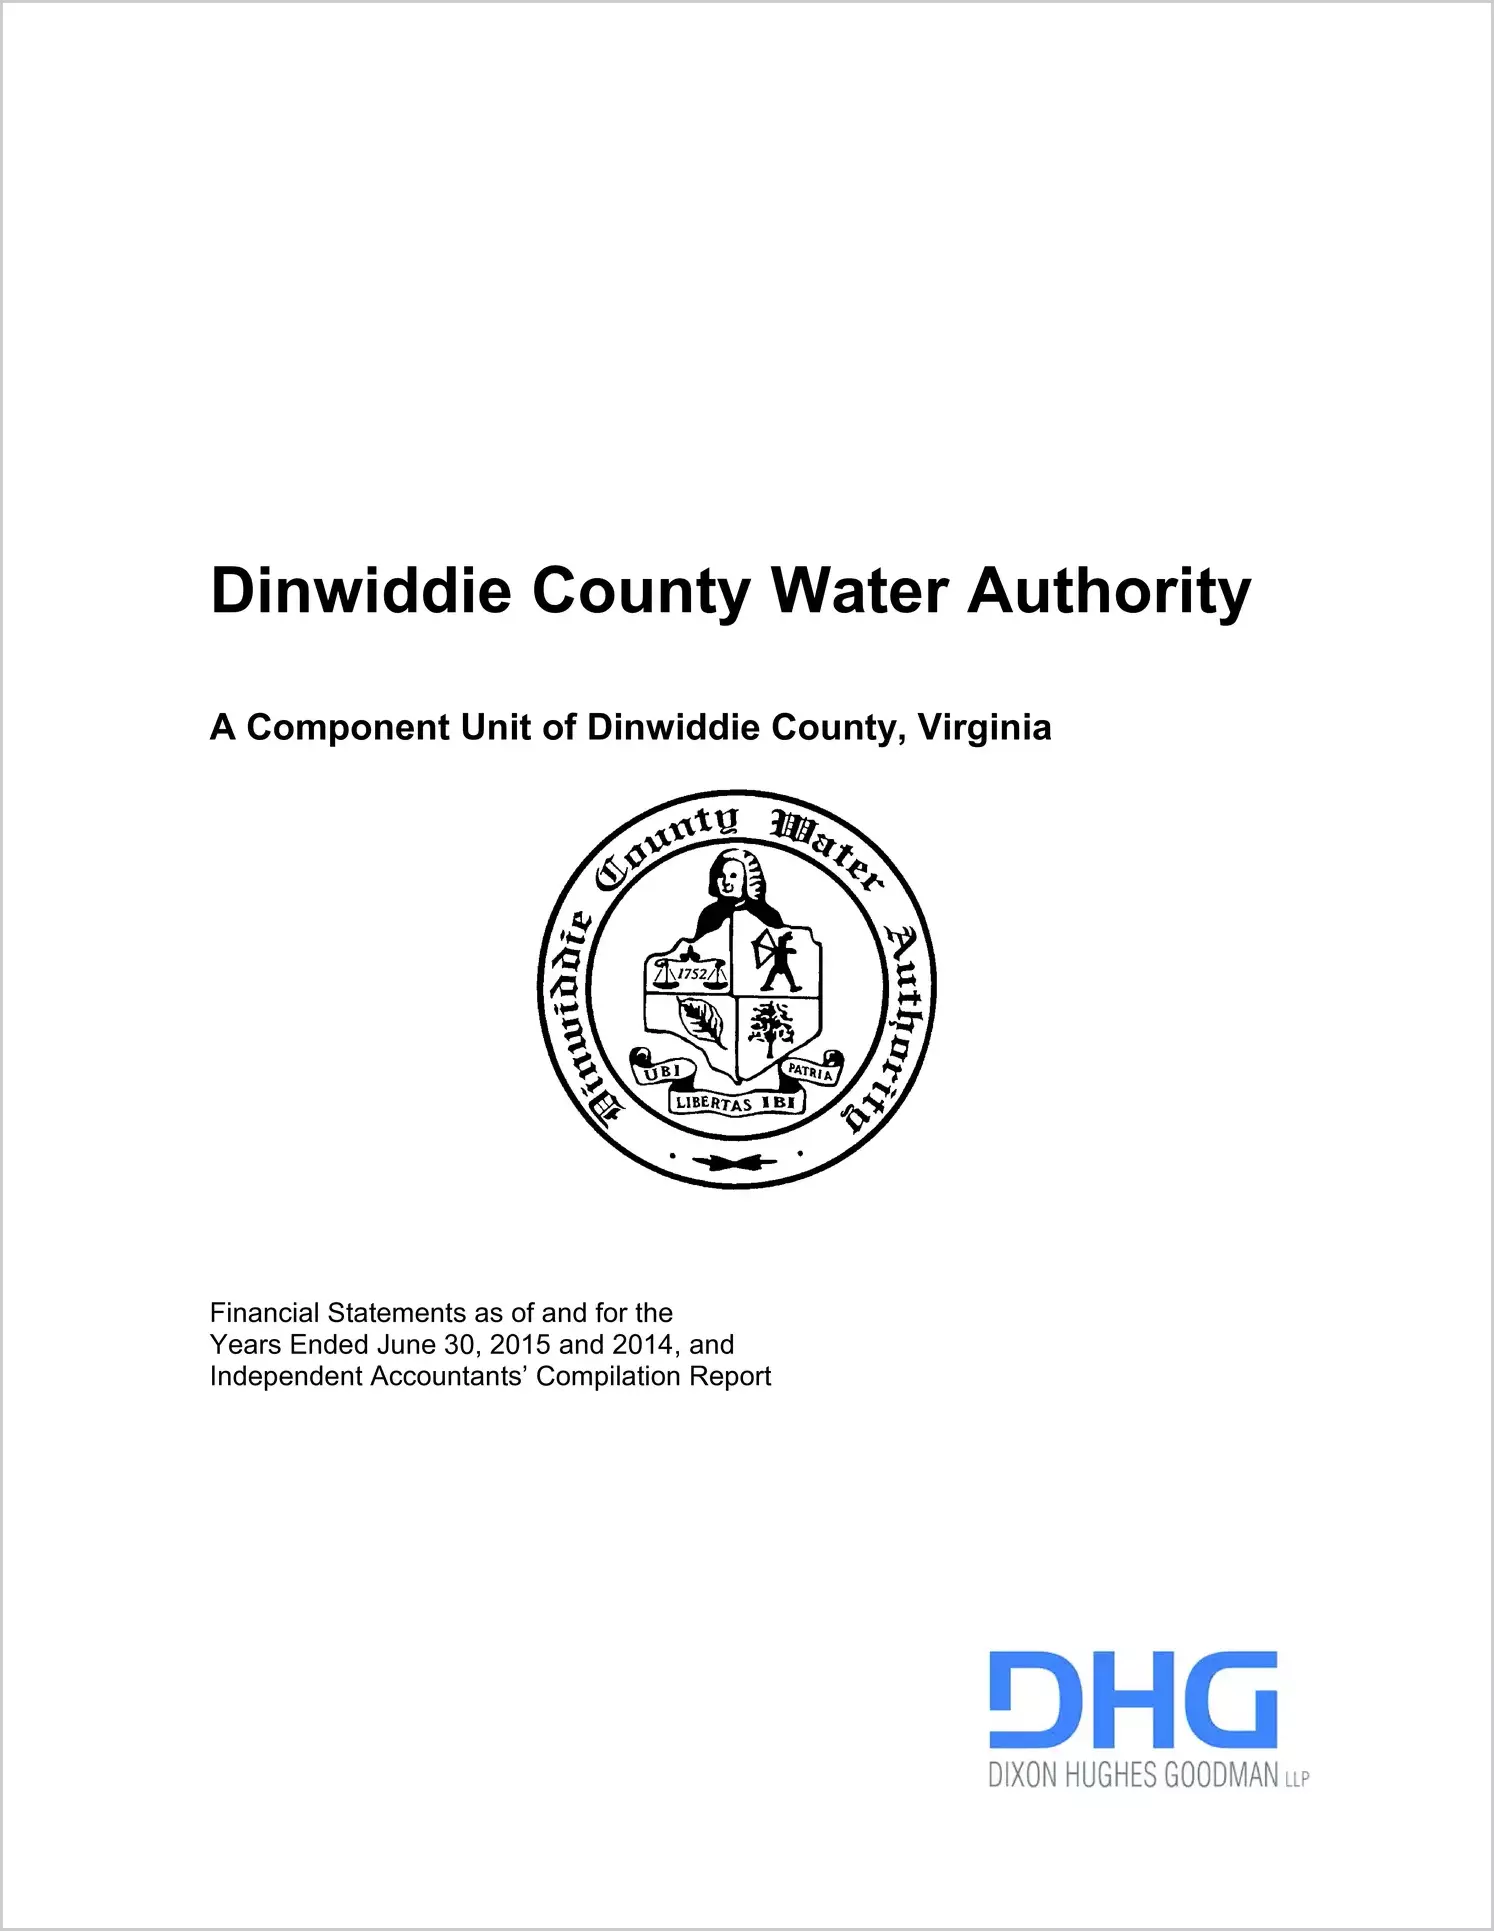 2015 ABC/Other Annual Financial Report  for Dinwiddie County Water Authority